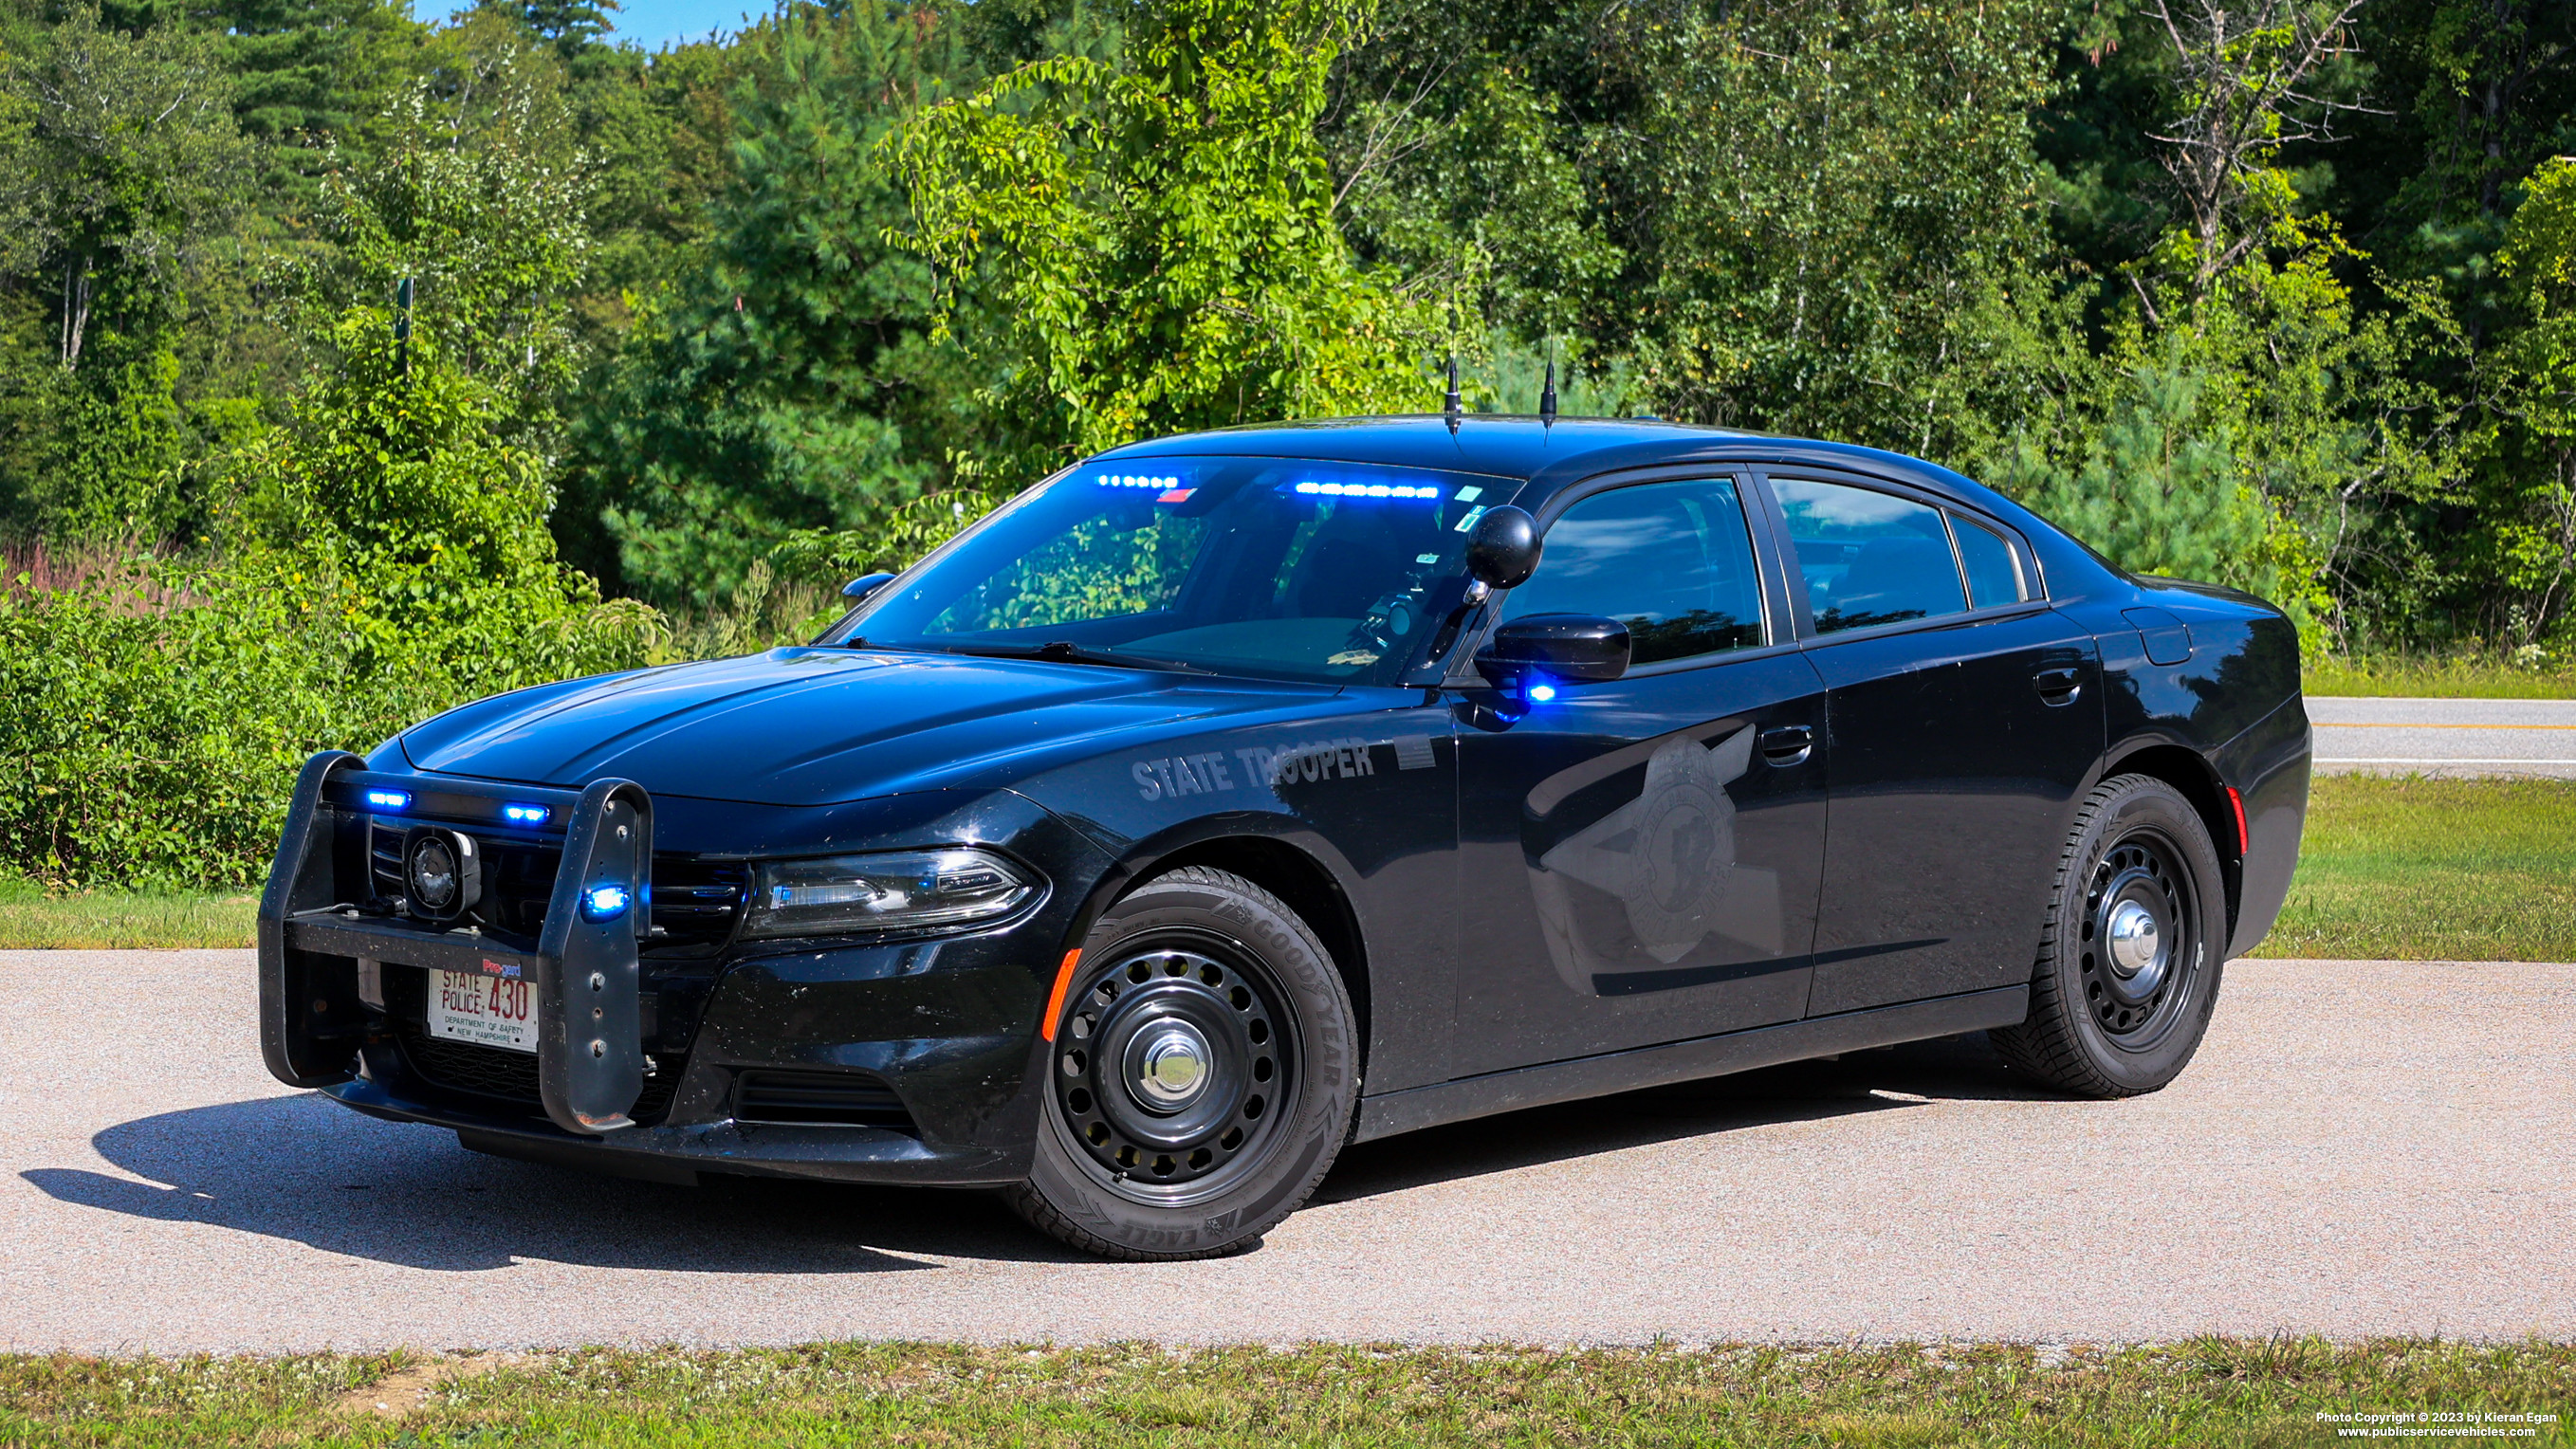 A photo  of New Hampshire State Police
            Cruiser 430, a 2018 Dodge Charger             taken by Kieran Egan